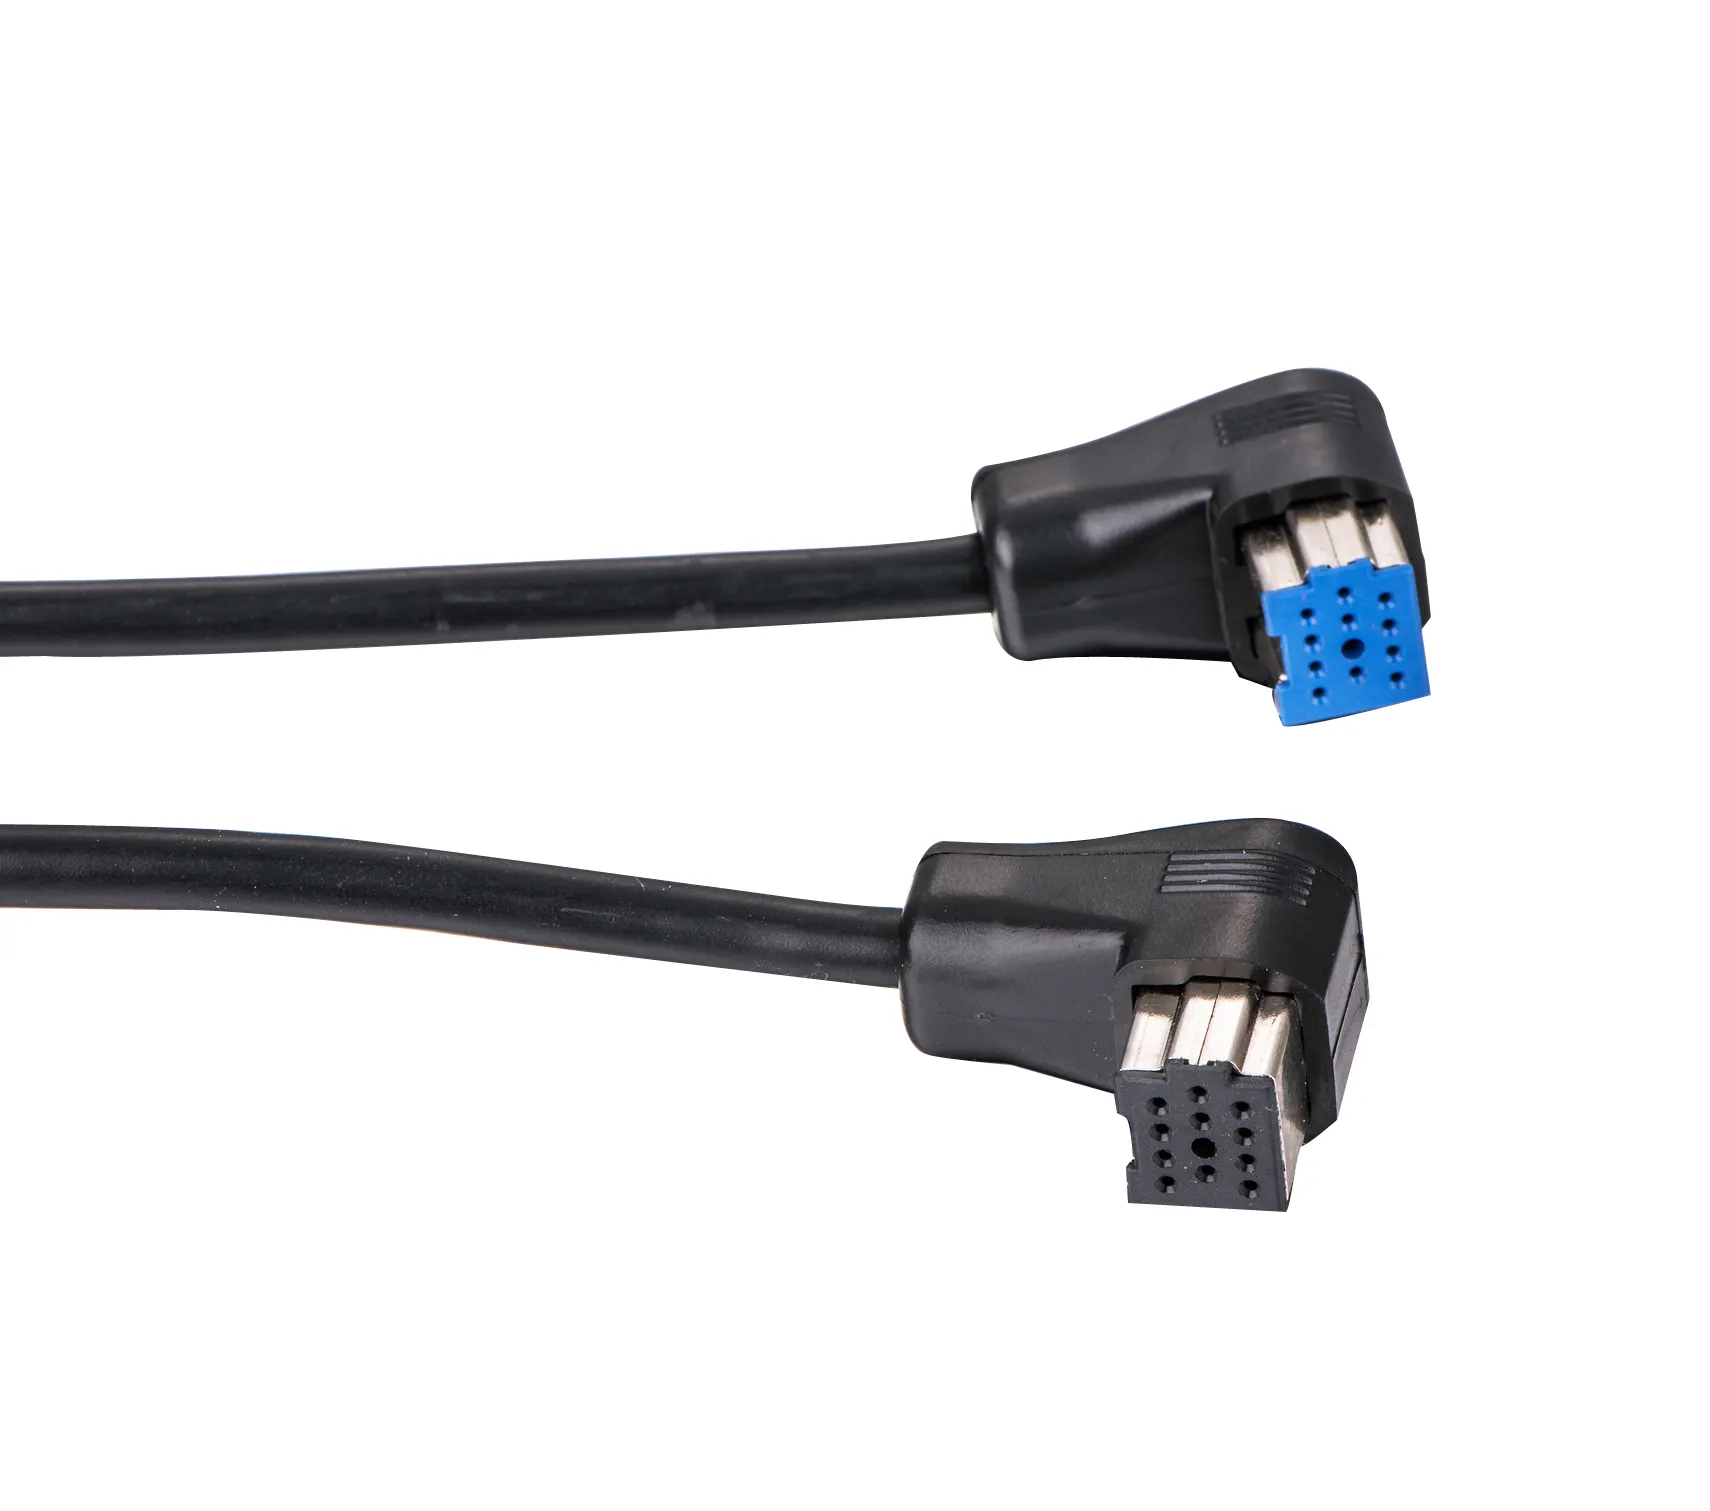 CD Changer Cable For Pioneer IP-Bus Lead M-Bus Extension 11 Pin DIN Male